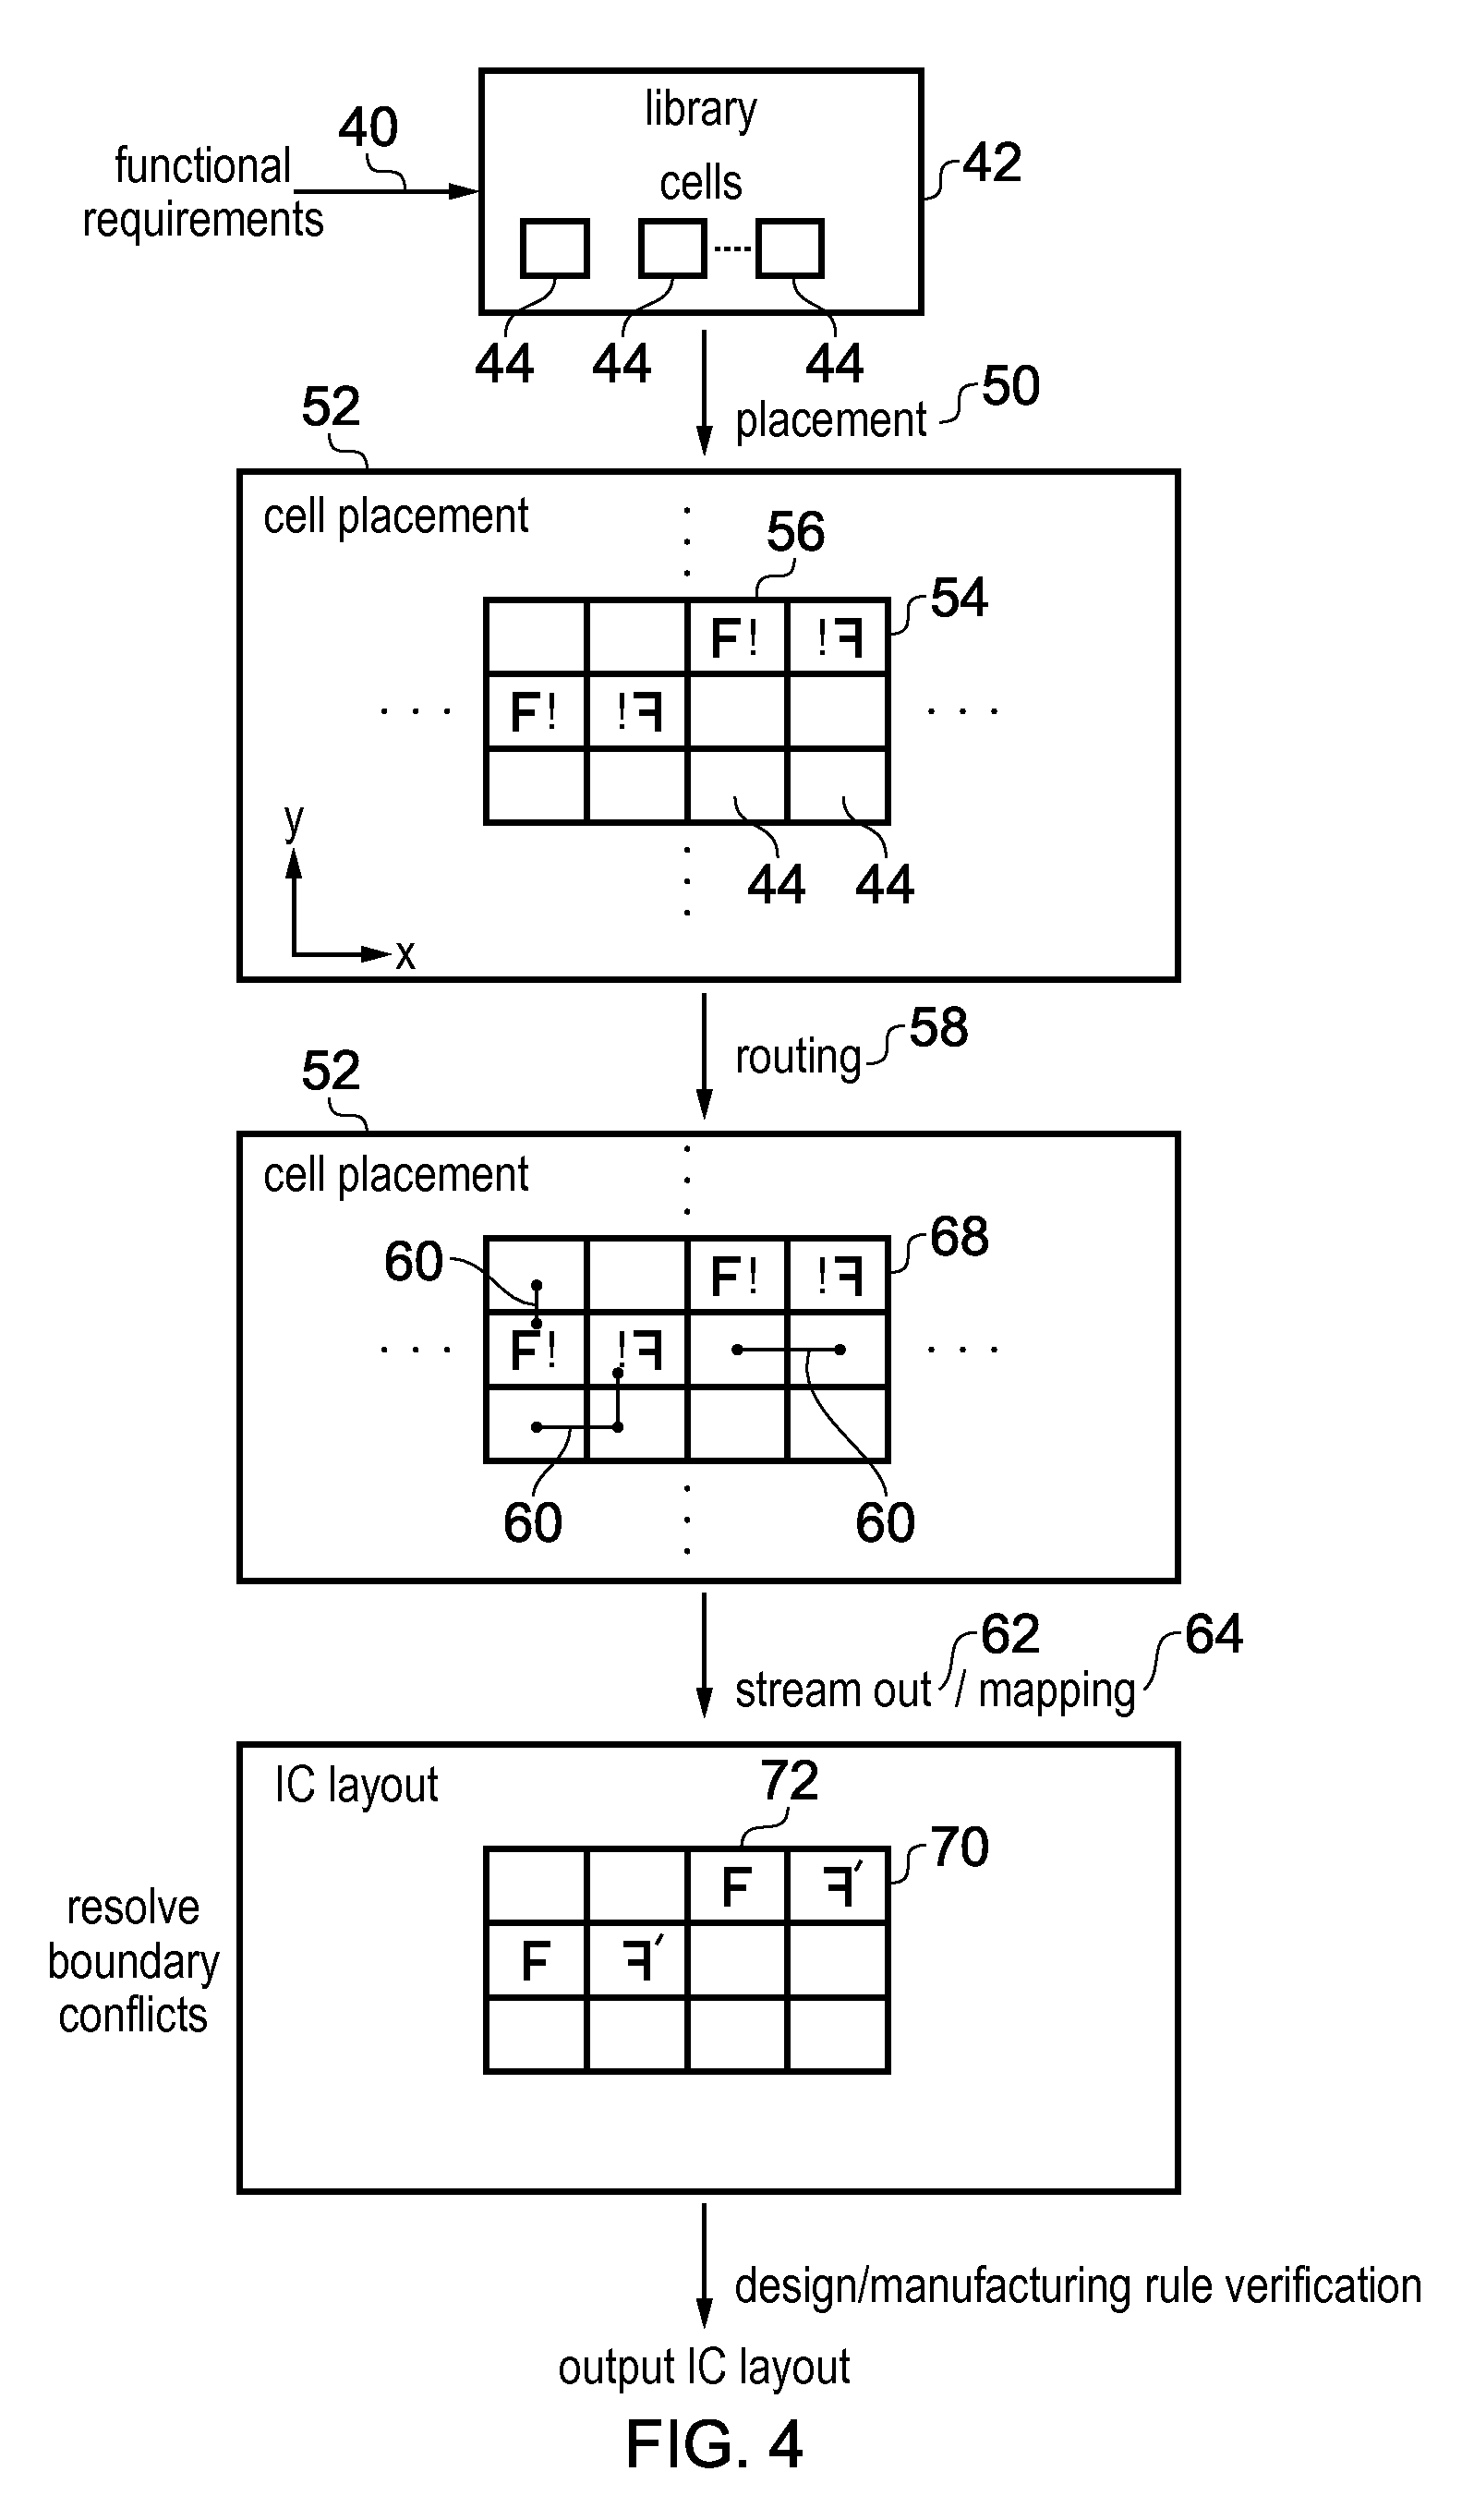 Considering compatibility of adjacent boundary regions for standard cells placement and routing